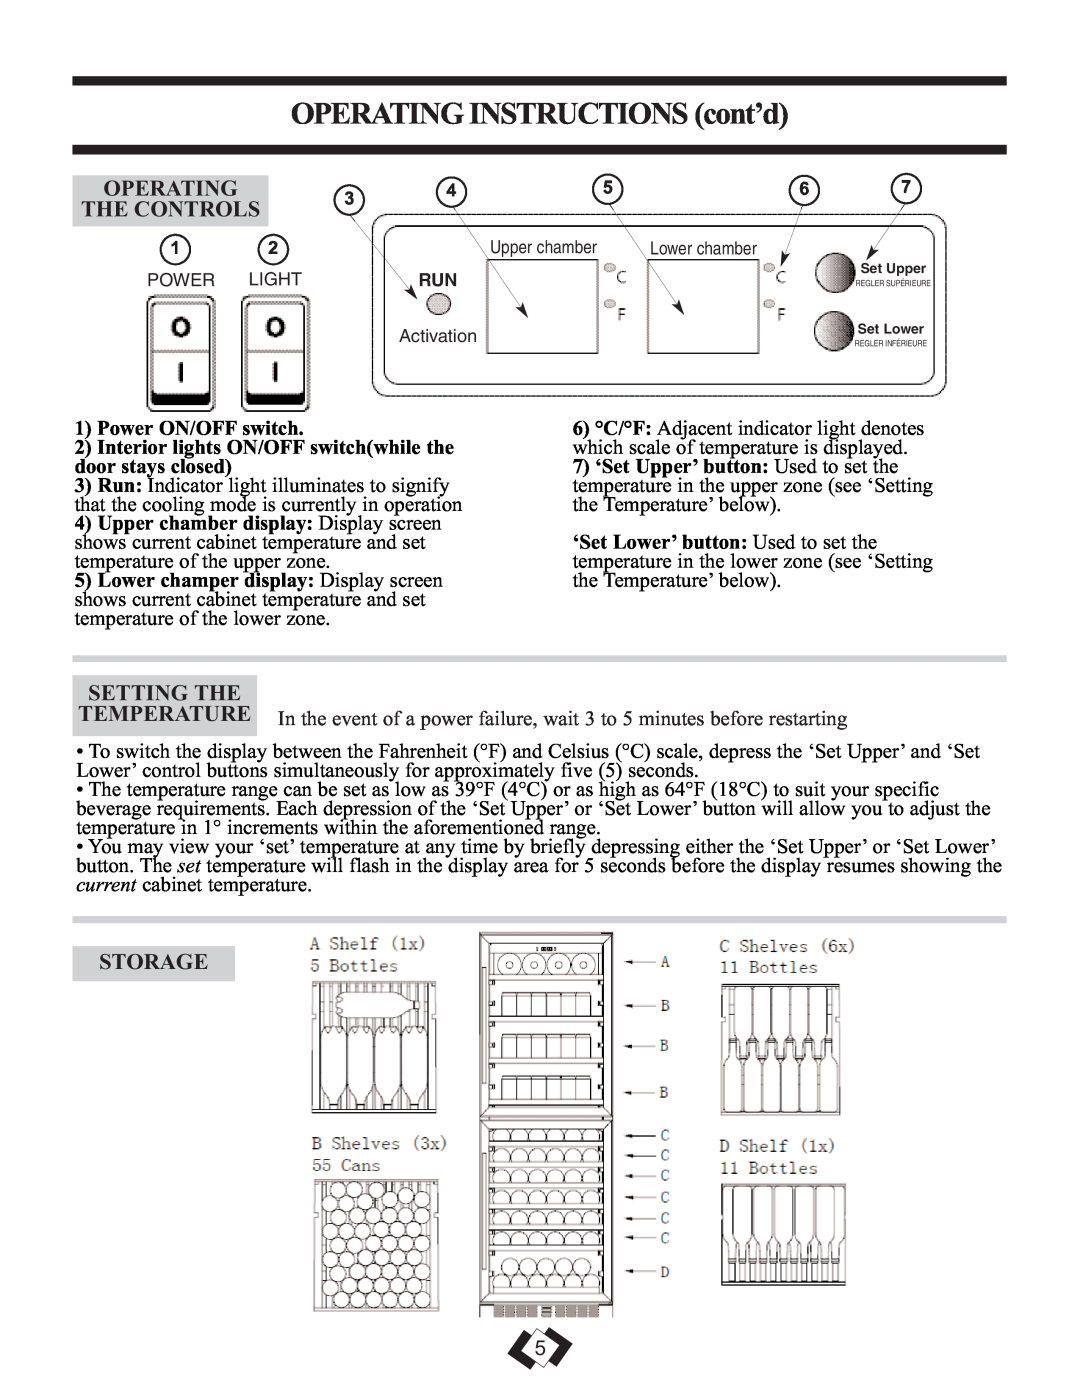 Danby DWBC14BLS OPERATINGINSTRUCTIONS cont’d, Operating, The Controls, Setting The, Storage, Power ON/OFF switch 